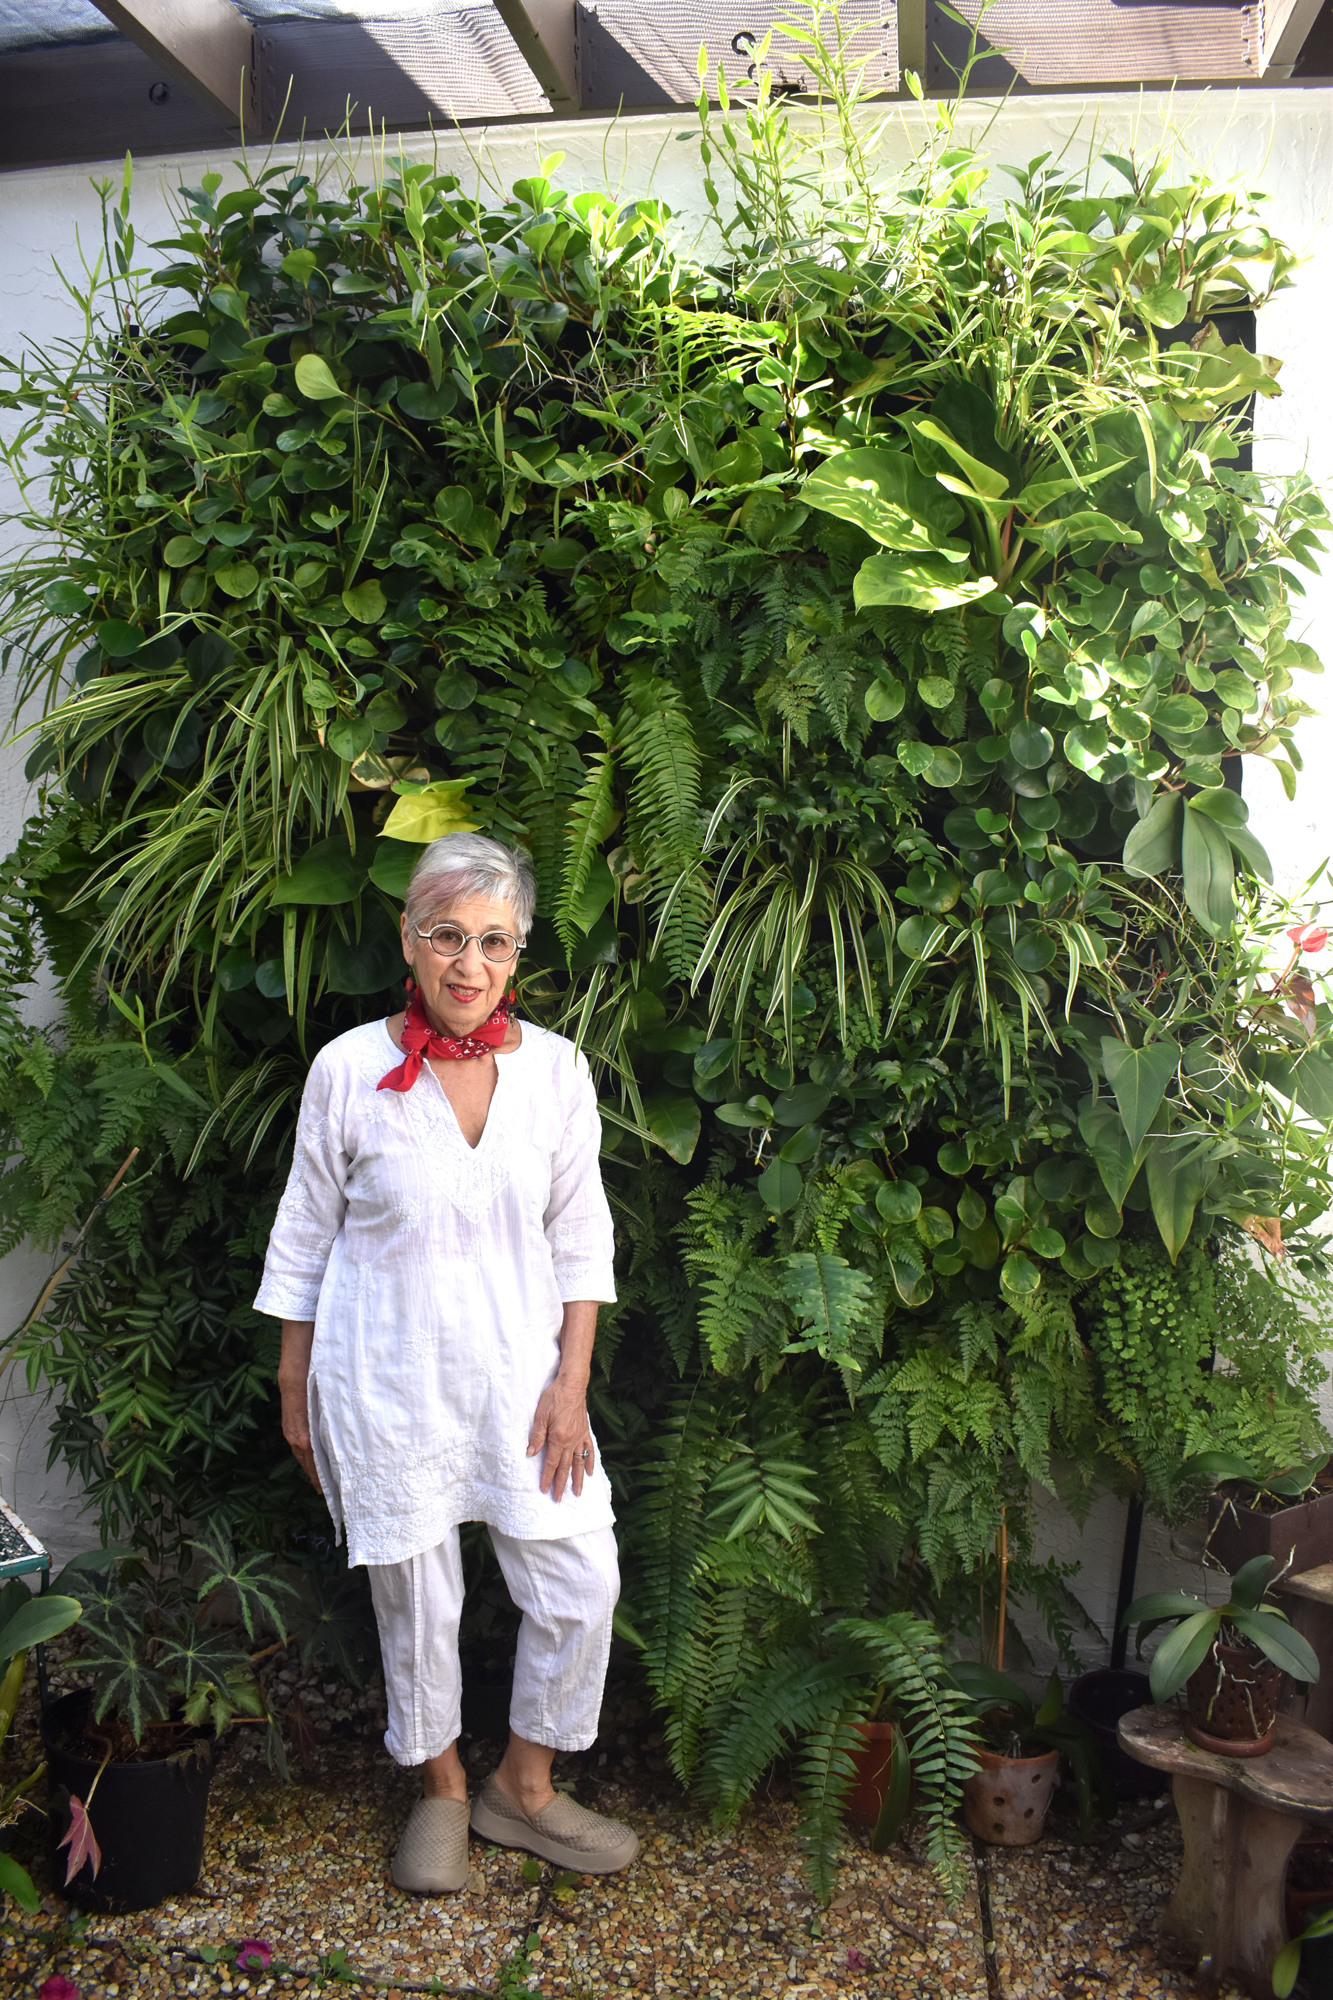 Sharon Burde had a living wall installed on her patio in April.